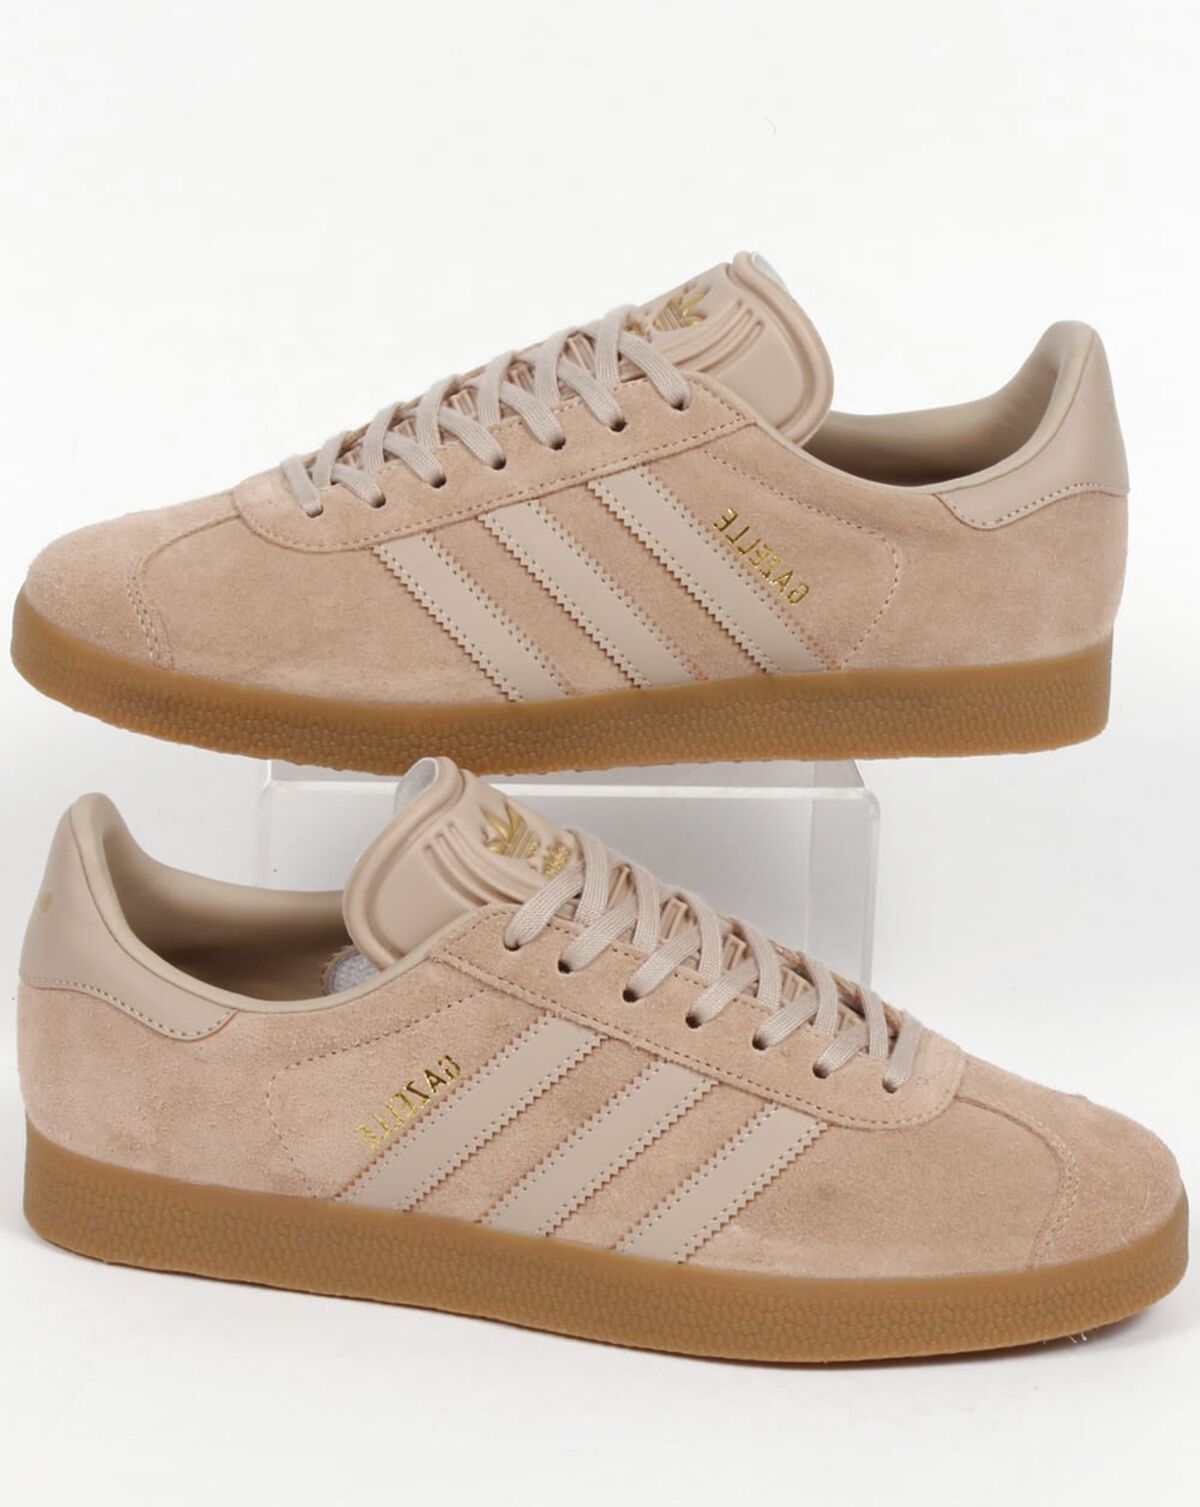 Adidas Cord Trainers for sale in UK | 33 used Adidas Cord Trainers